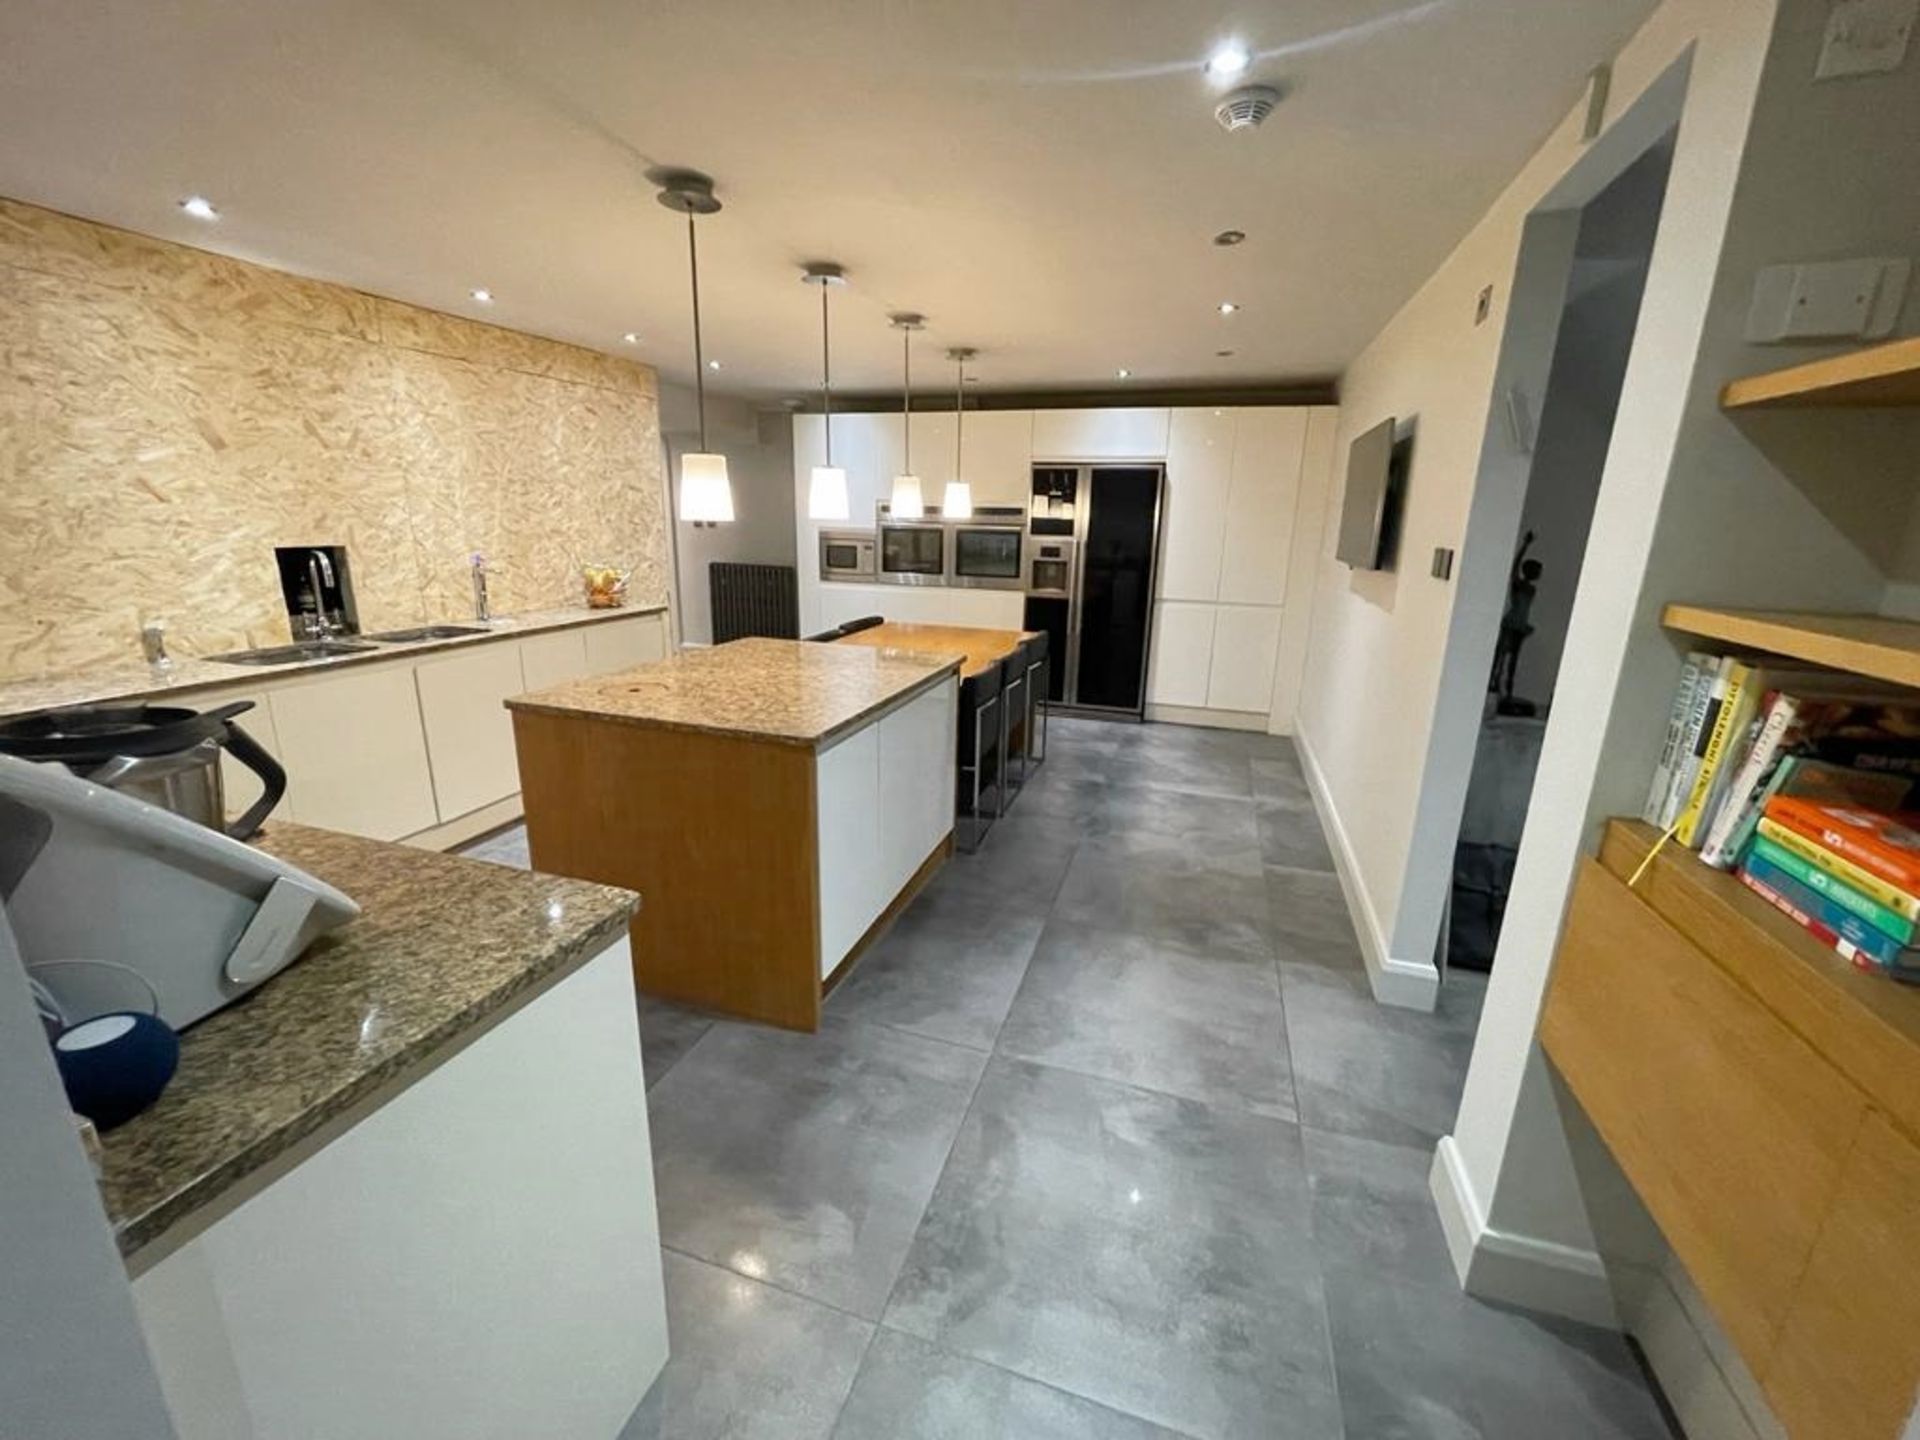 1 x Stunning PARAPAN Handleless Fitted Kitchen with Neff Appliances, Granite Worktops & Island - Image 116 of 126